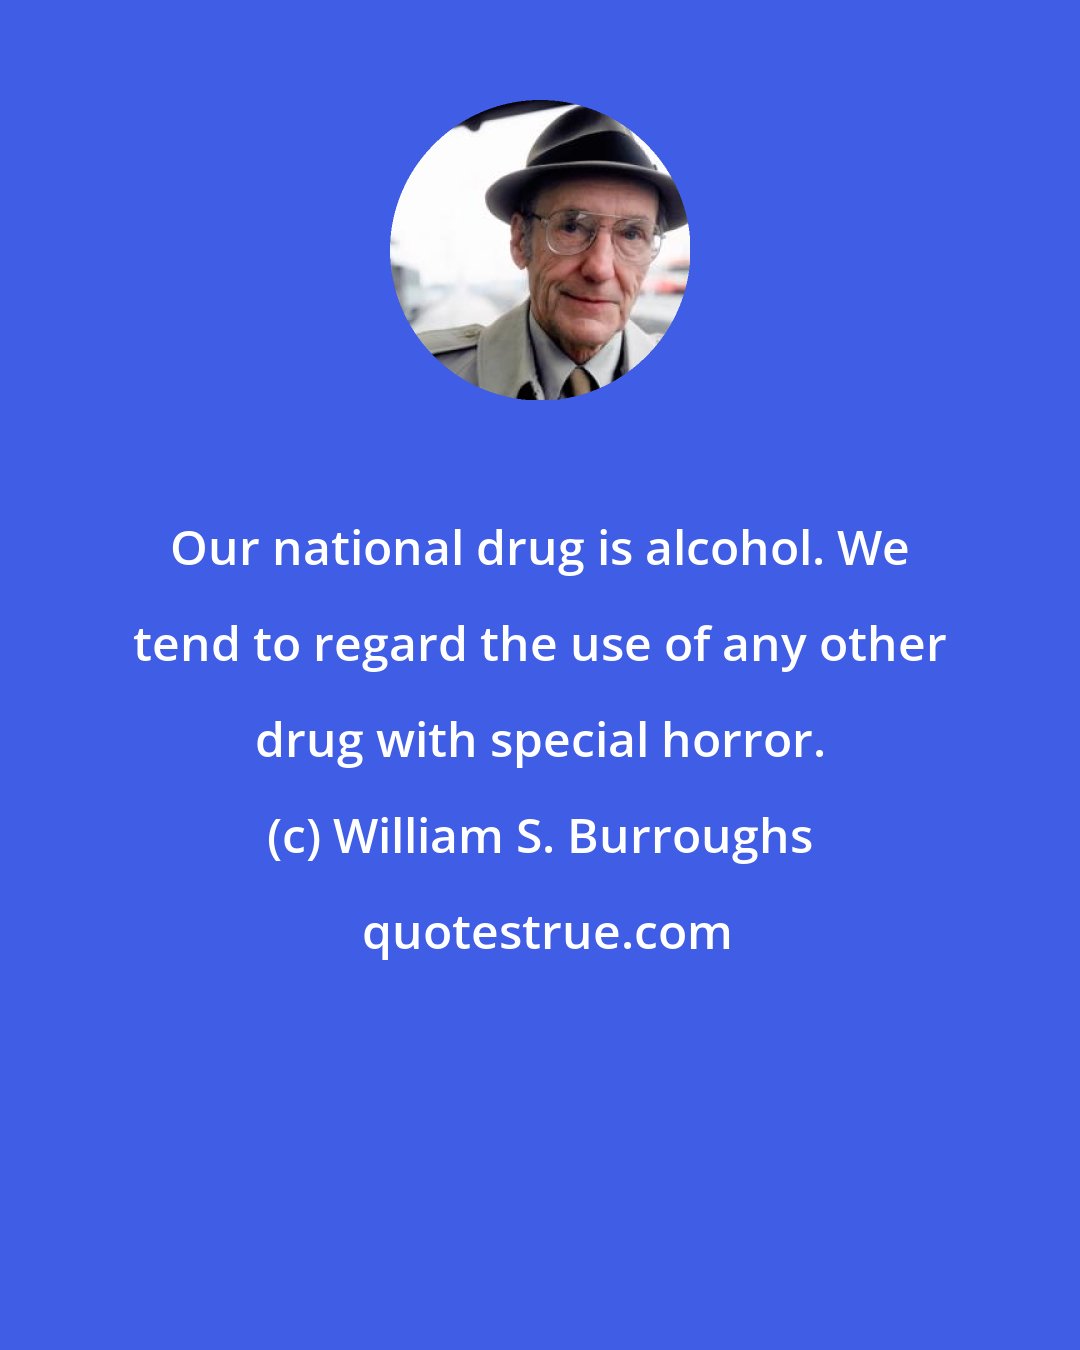 William S. Burroughs: Our national drug is alcohol. We tend to regard the use of any other drug with special horror.